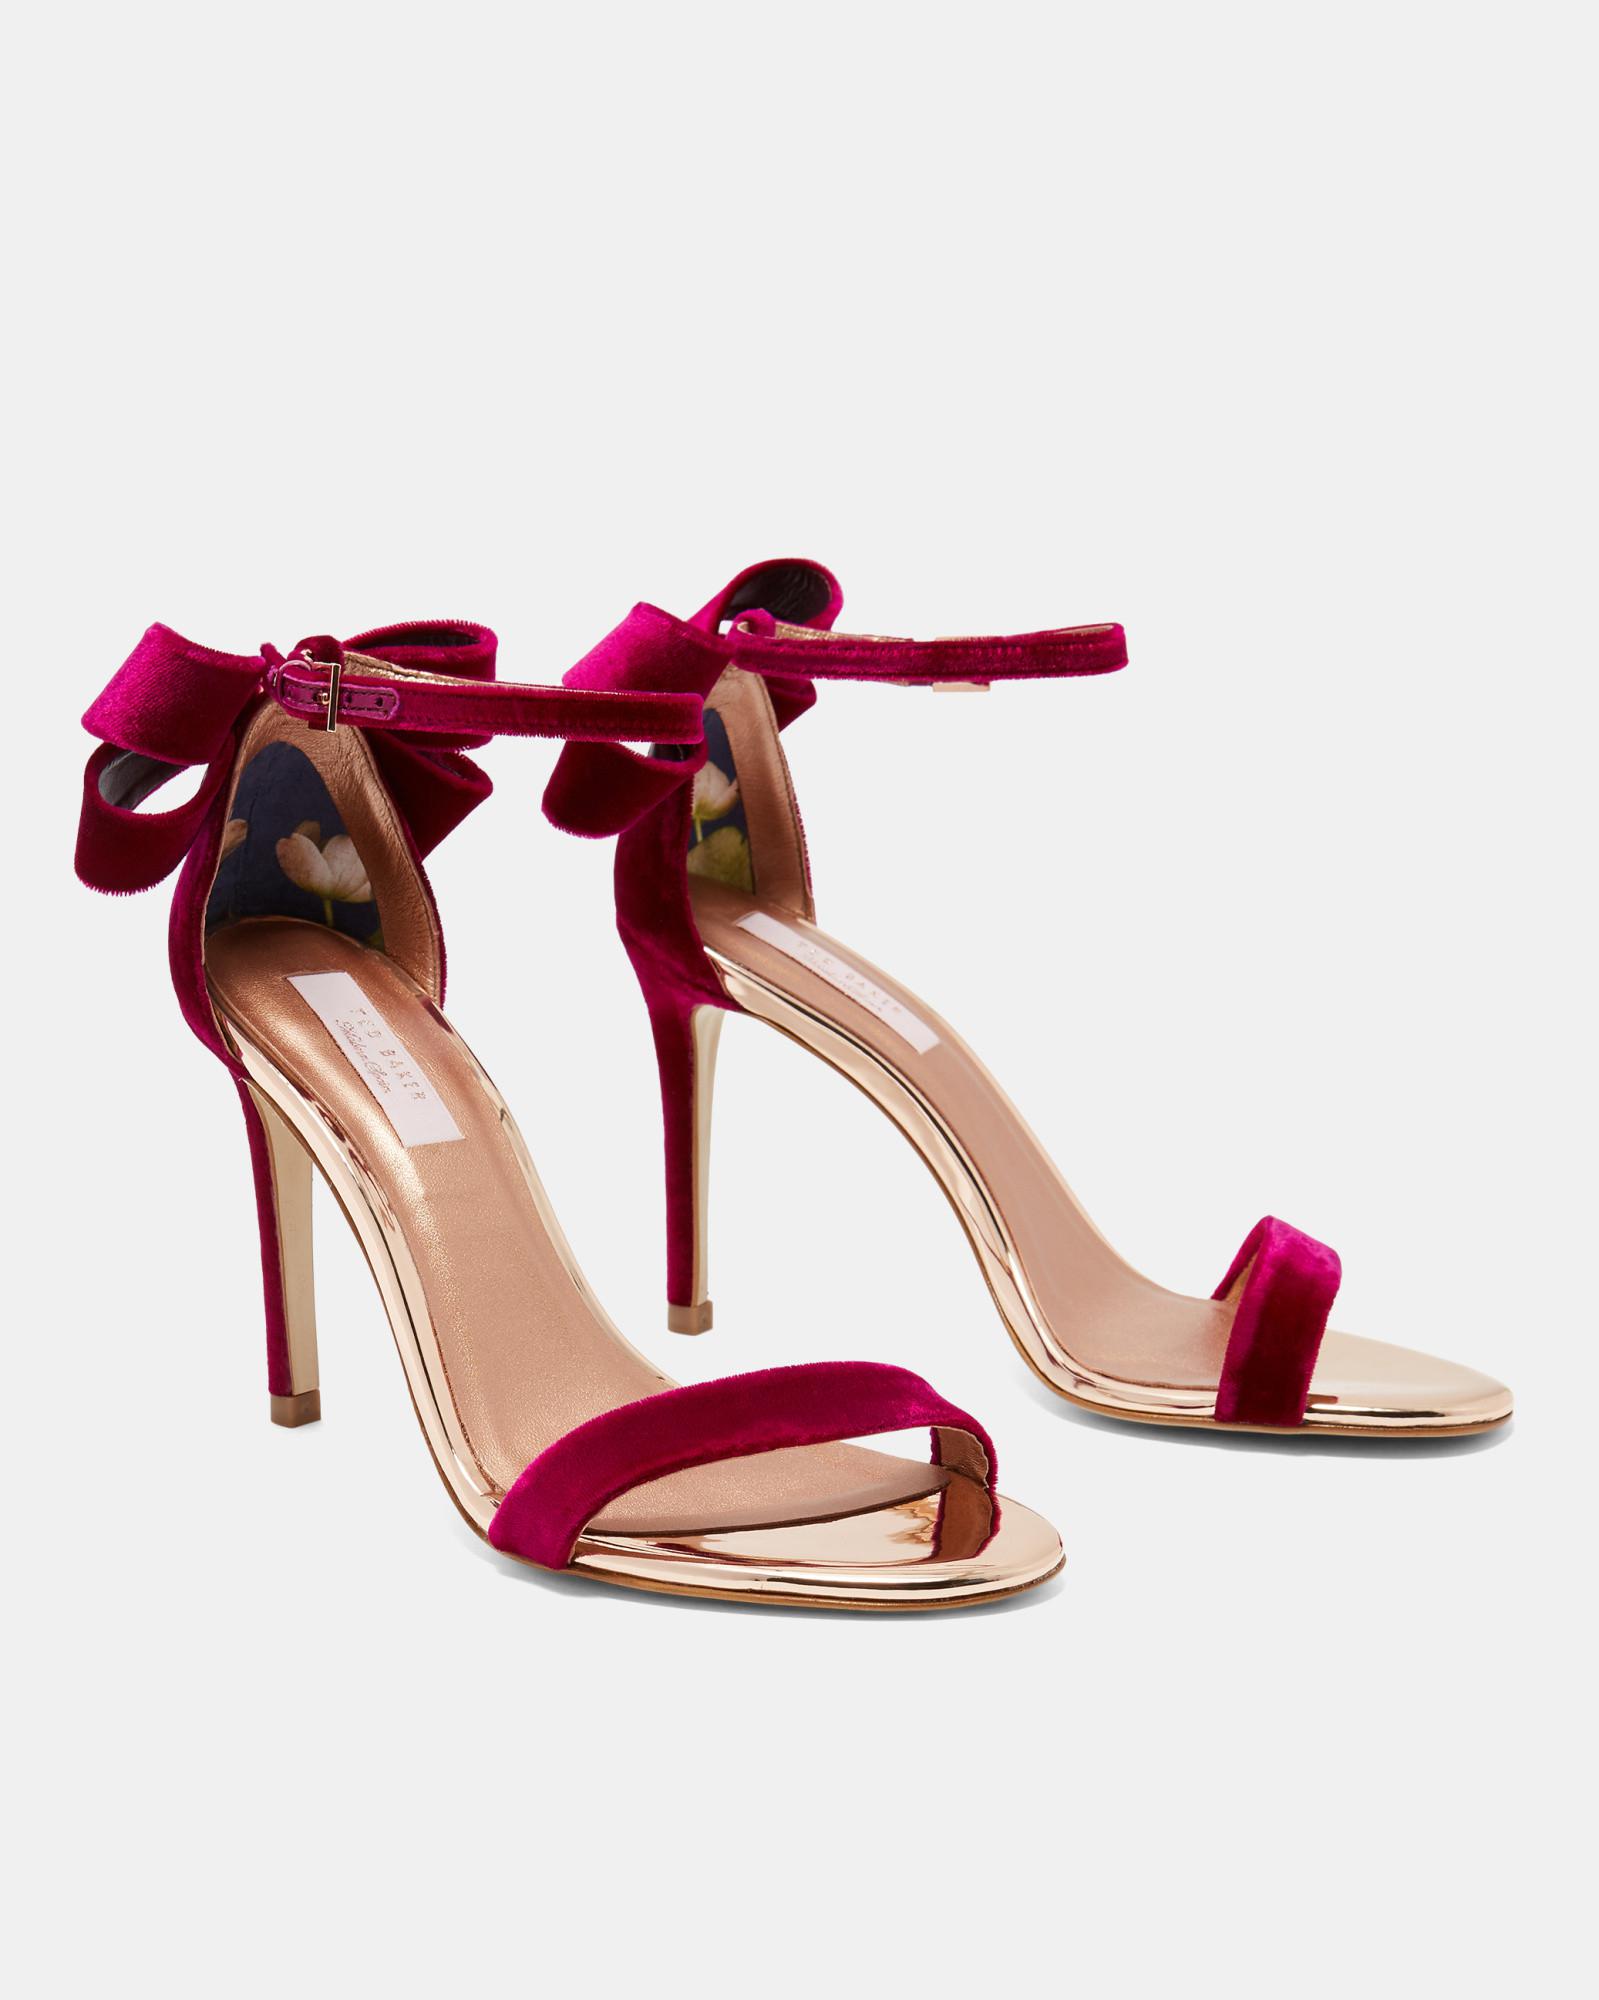 Ted Baker Statement Bow Velvet Sandals in Deep Pink (Pink) - Lyst